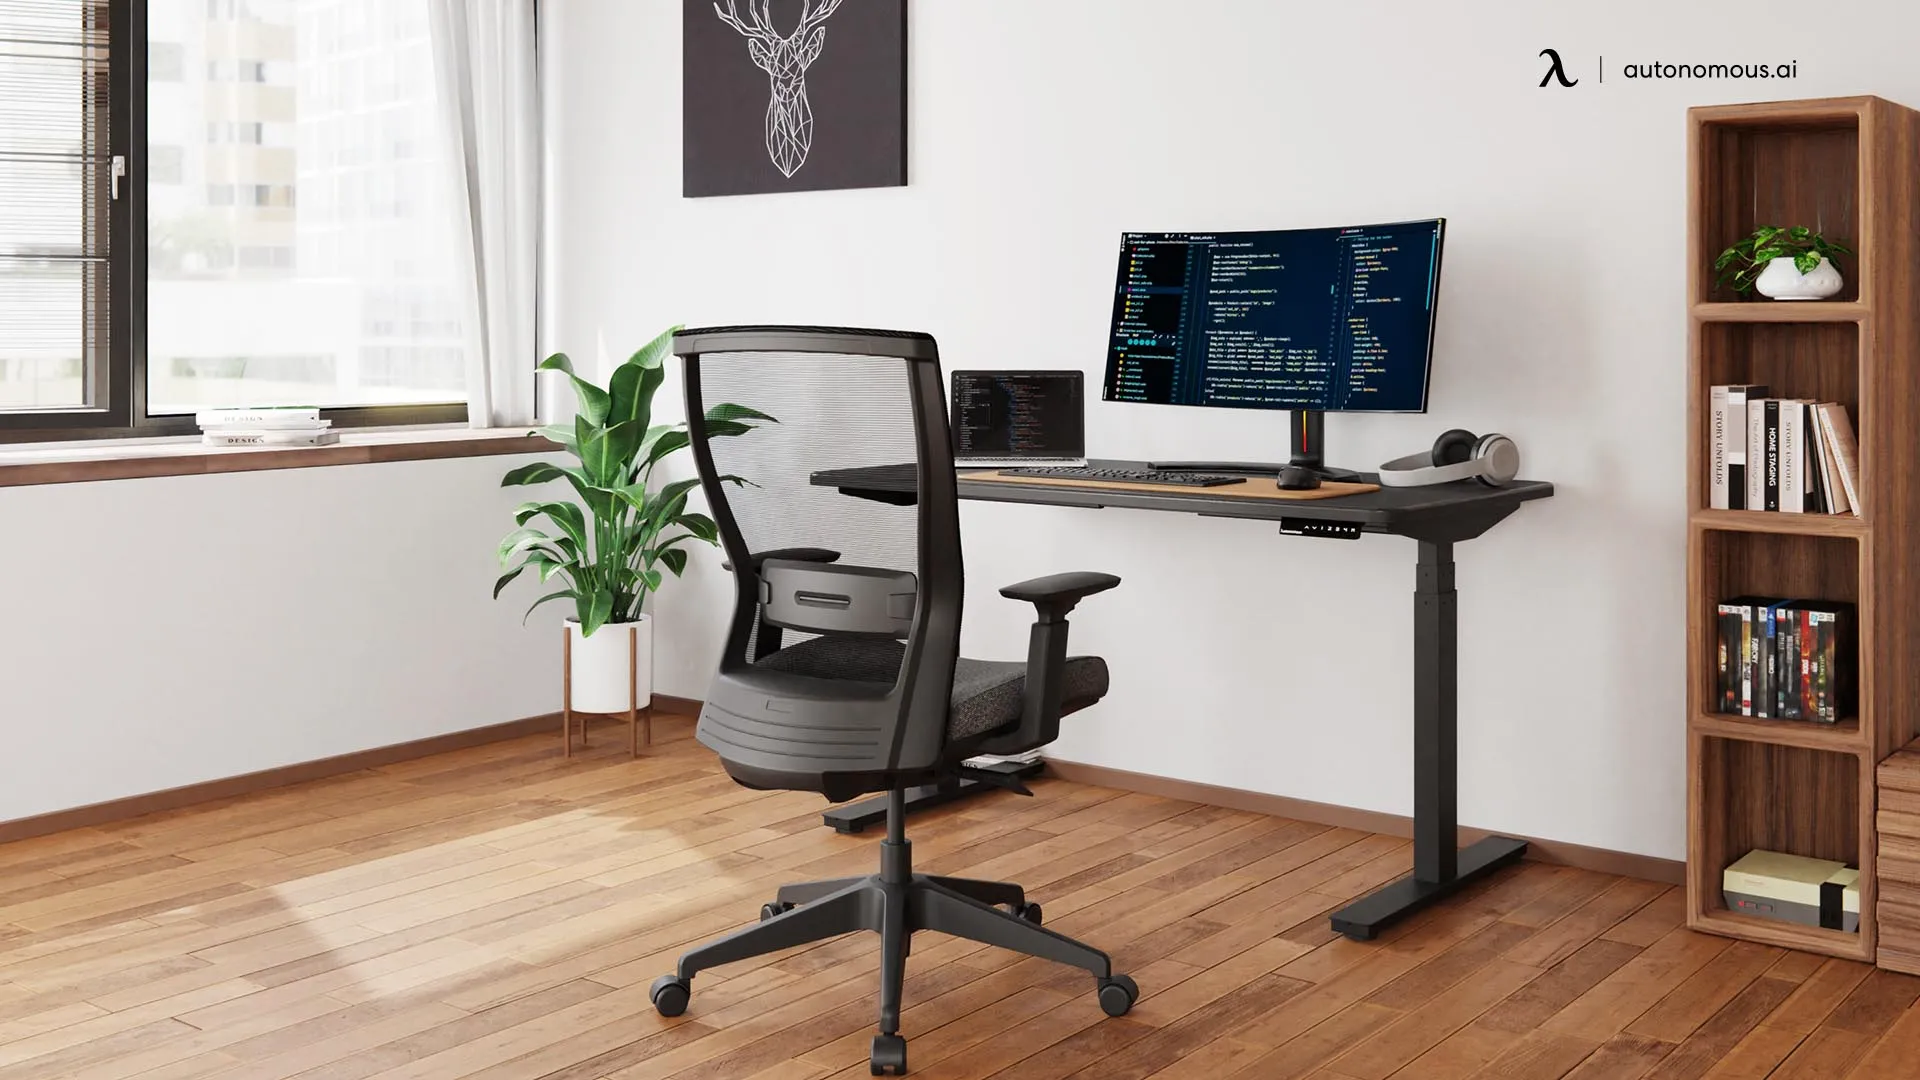 support of stylish office chair